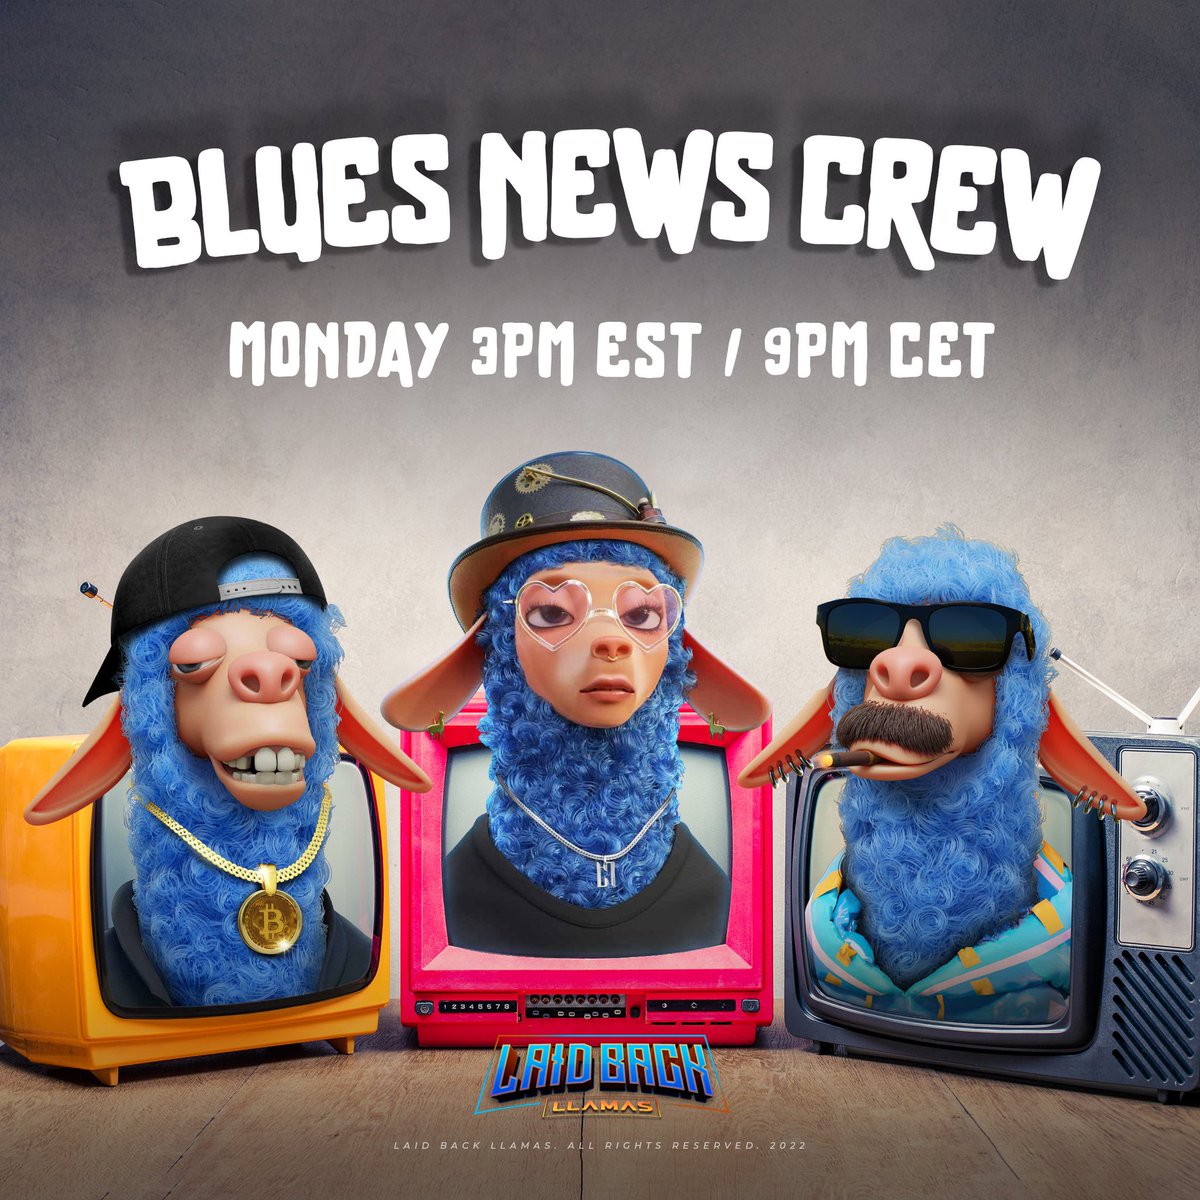 Another Monday, another Blues News Crew Spaces 📢🦙

Join @ScottyDhont and me in just under 2 hours and talk about everything llama 🦙💙
 twitter.com/i/spaces/1nAKE…

#LaidBackLlamas #LegionOfLlamas